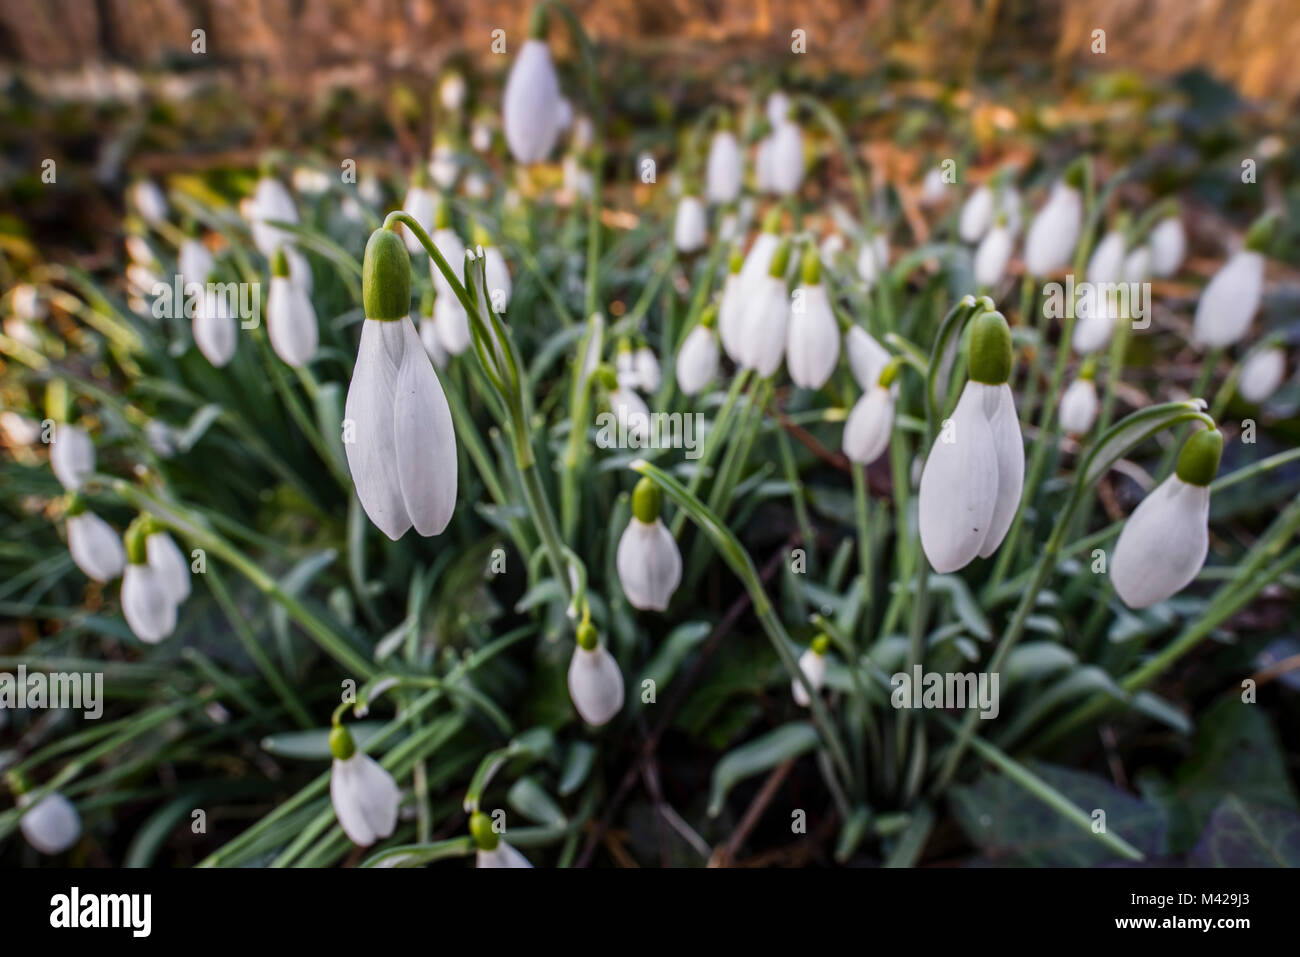 Common snowdrops (Galanthus nivalis) in flower in forest in late winter / early spring Stock Photo